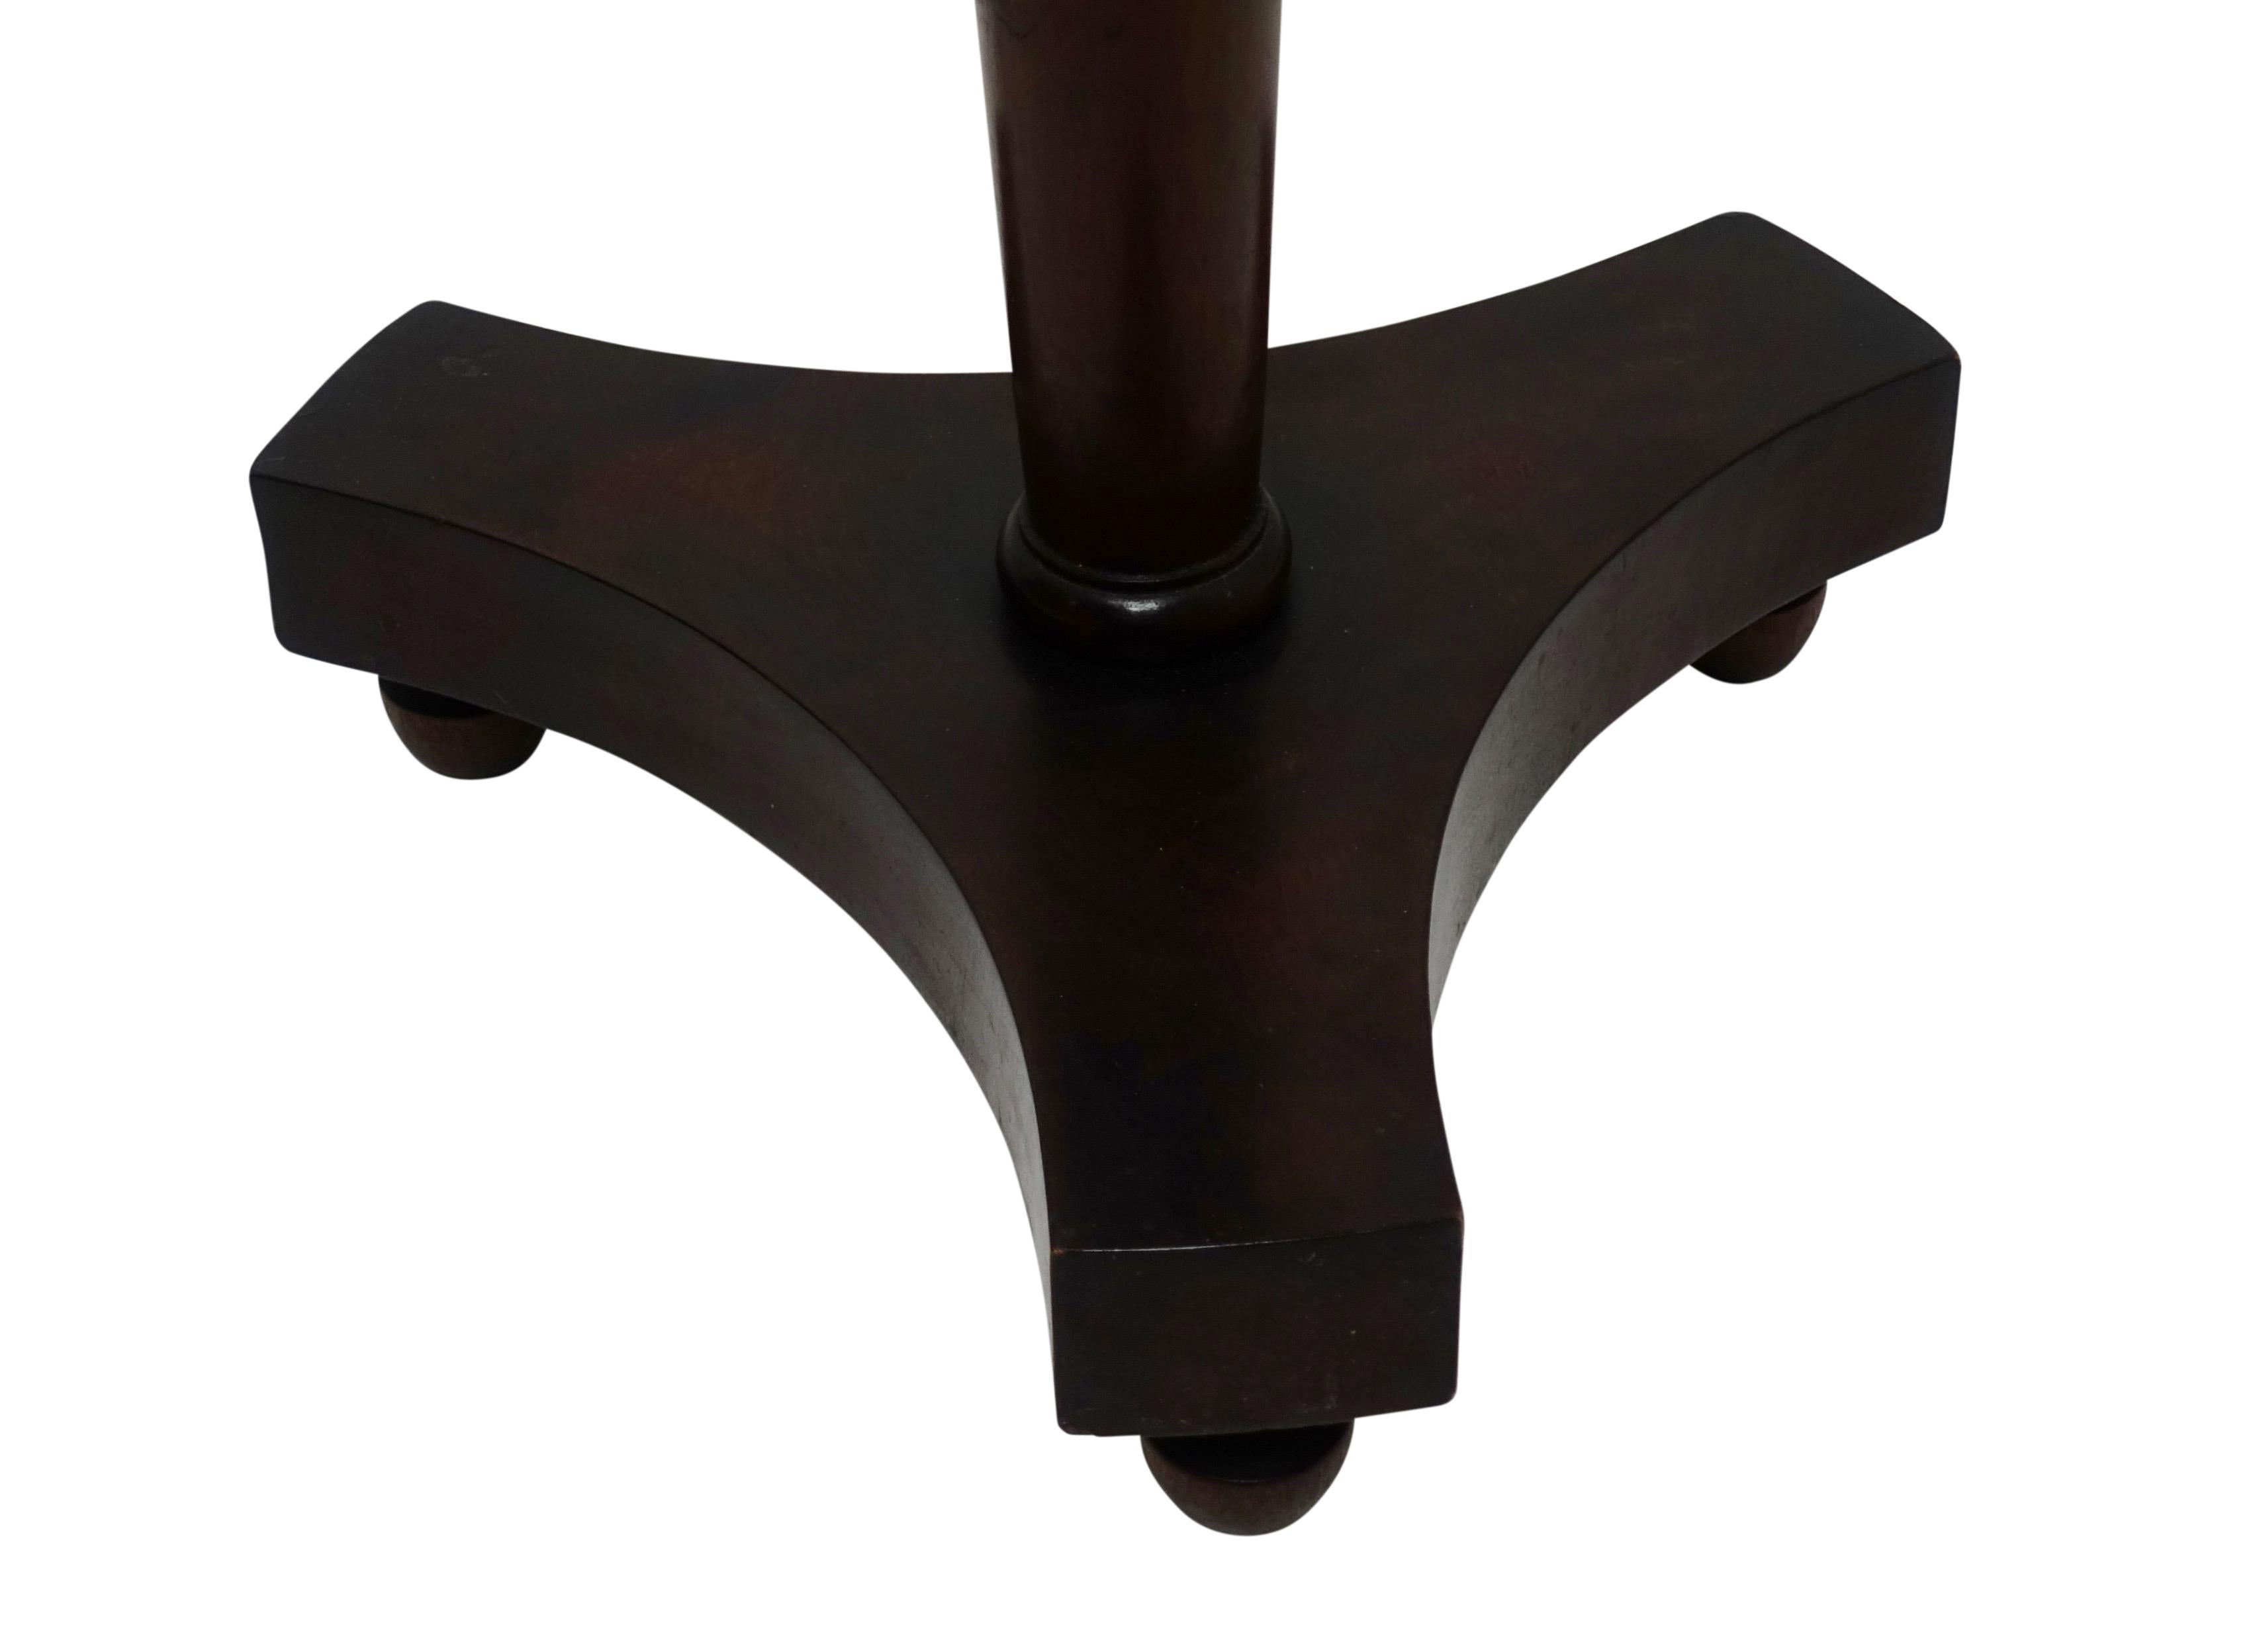 19th Century French Empire Style Mahogany and Marble Candle Stand Side Table, circa 1840